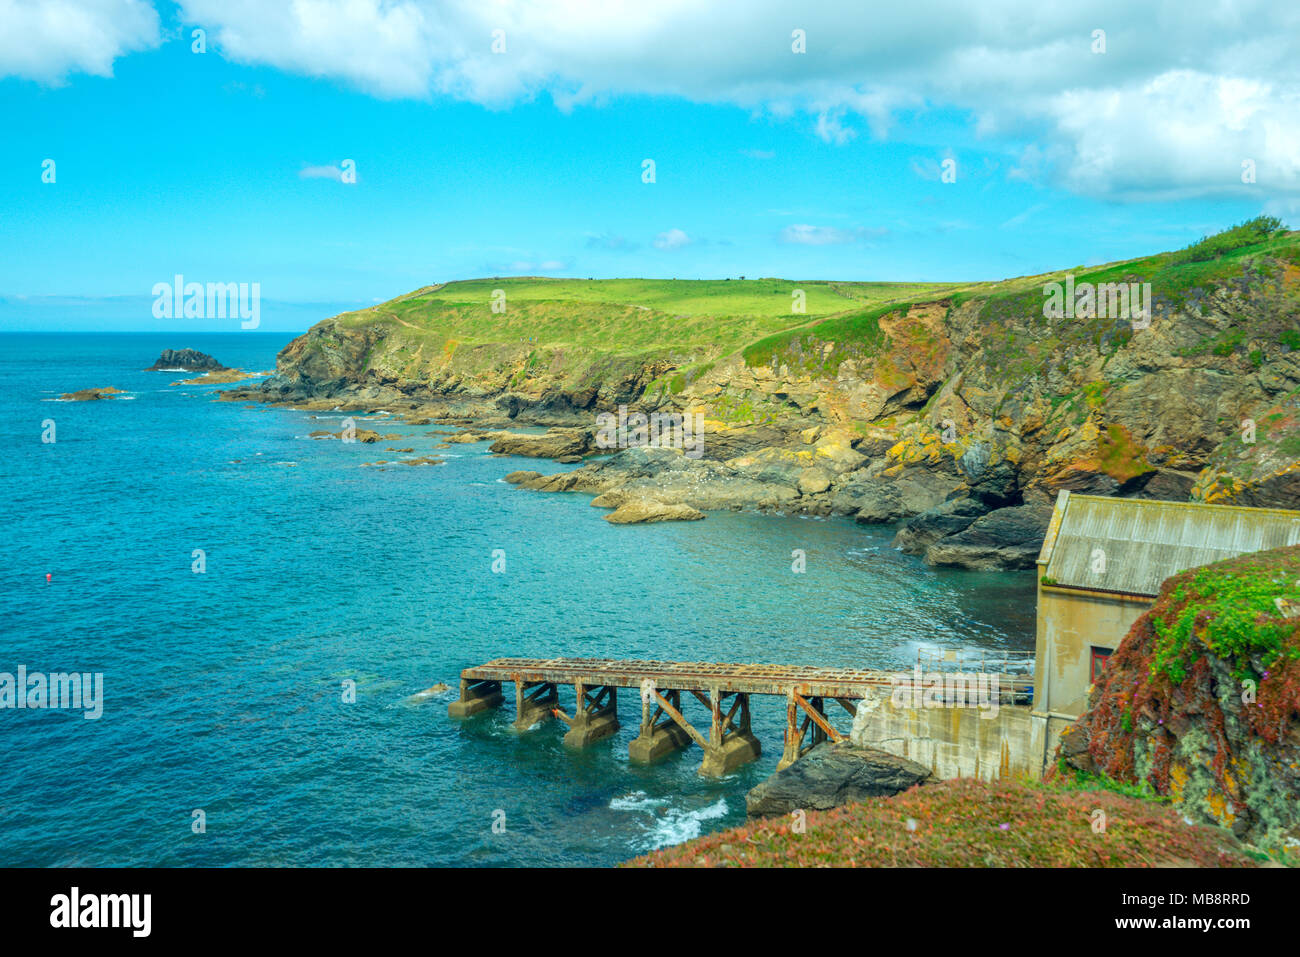 A boat house and slipway in a small bay at Lizard Point in Cornwall, the most southerly part of the British Isles Stock Photo